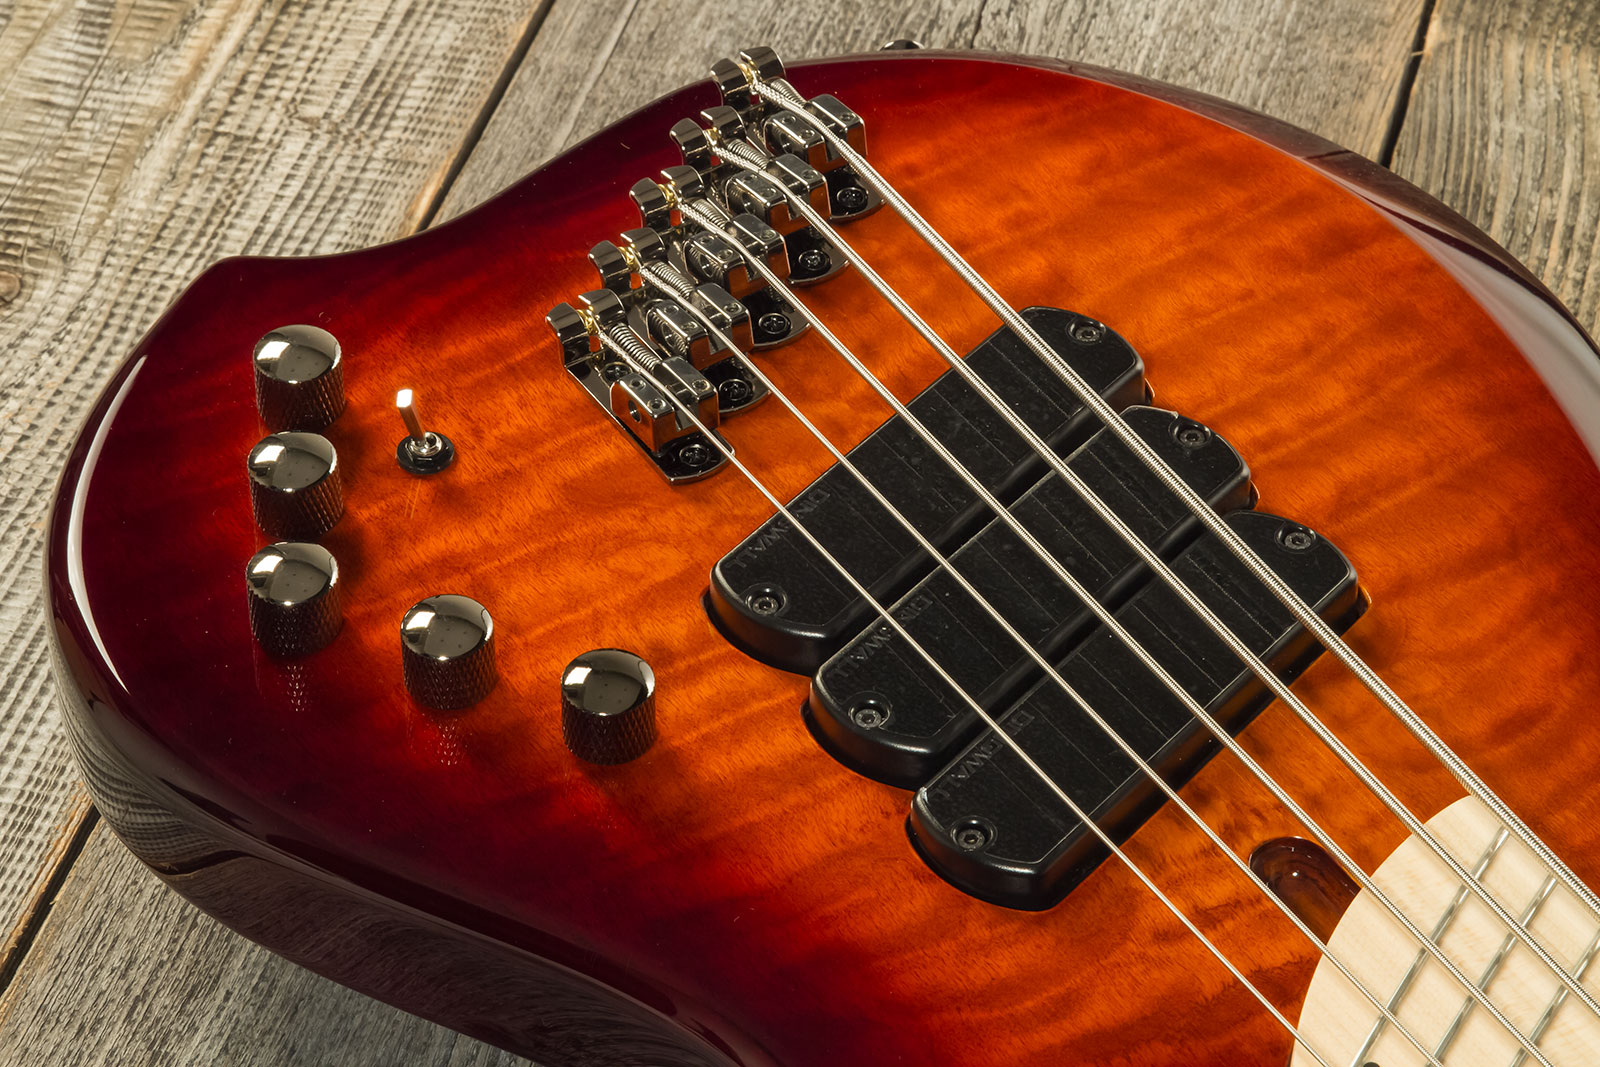 Dingwall Combustion Cb3 5c 3pu Active Mn - Vintage Burst Gloss - Solid body electric bass - Variation 3